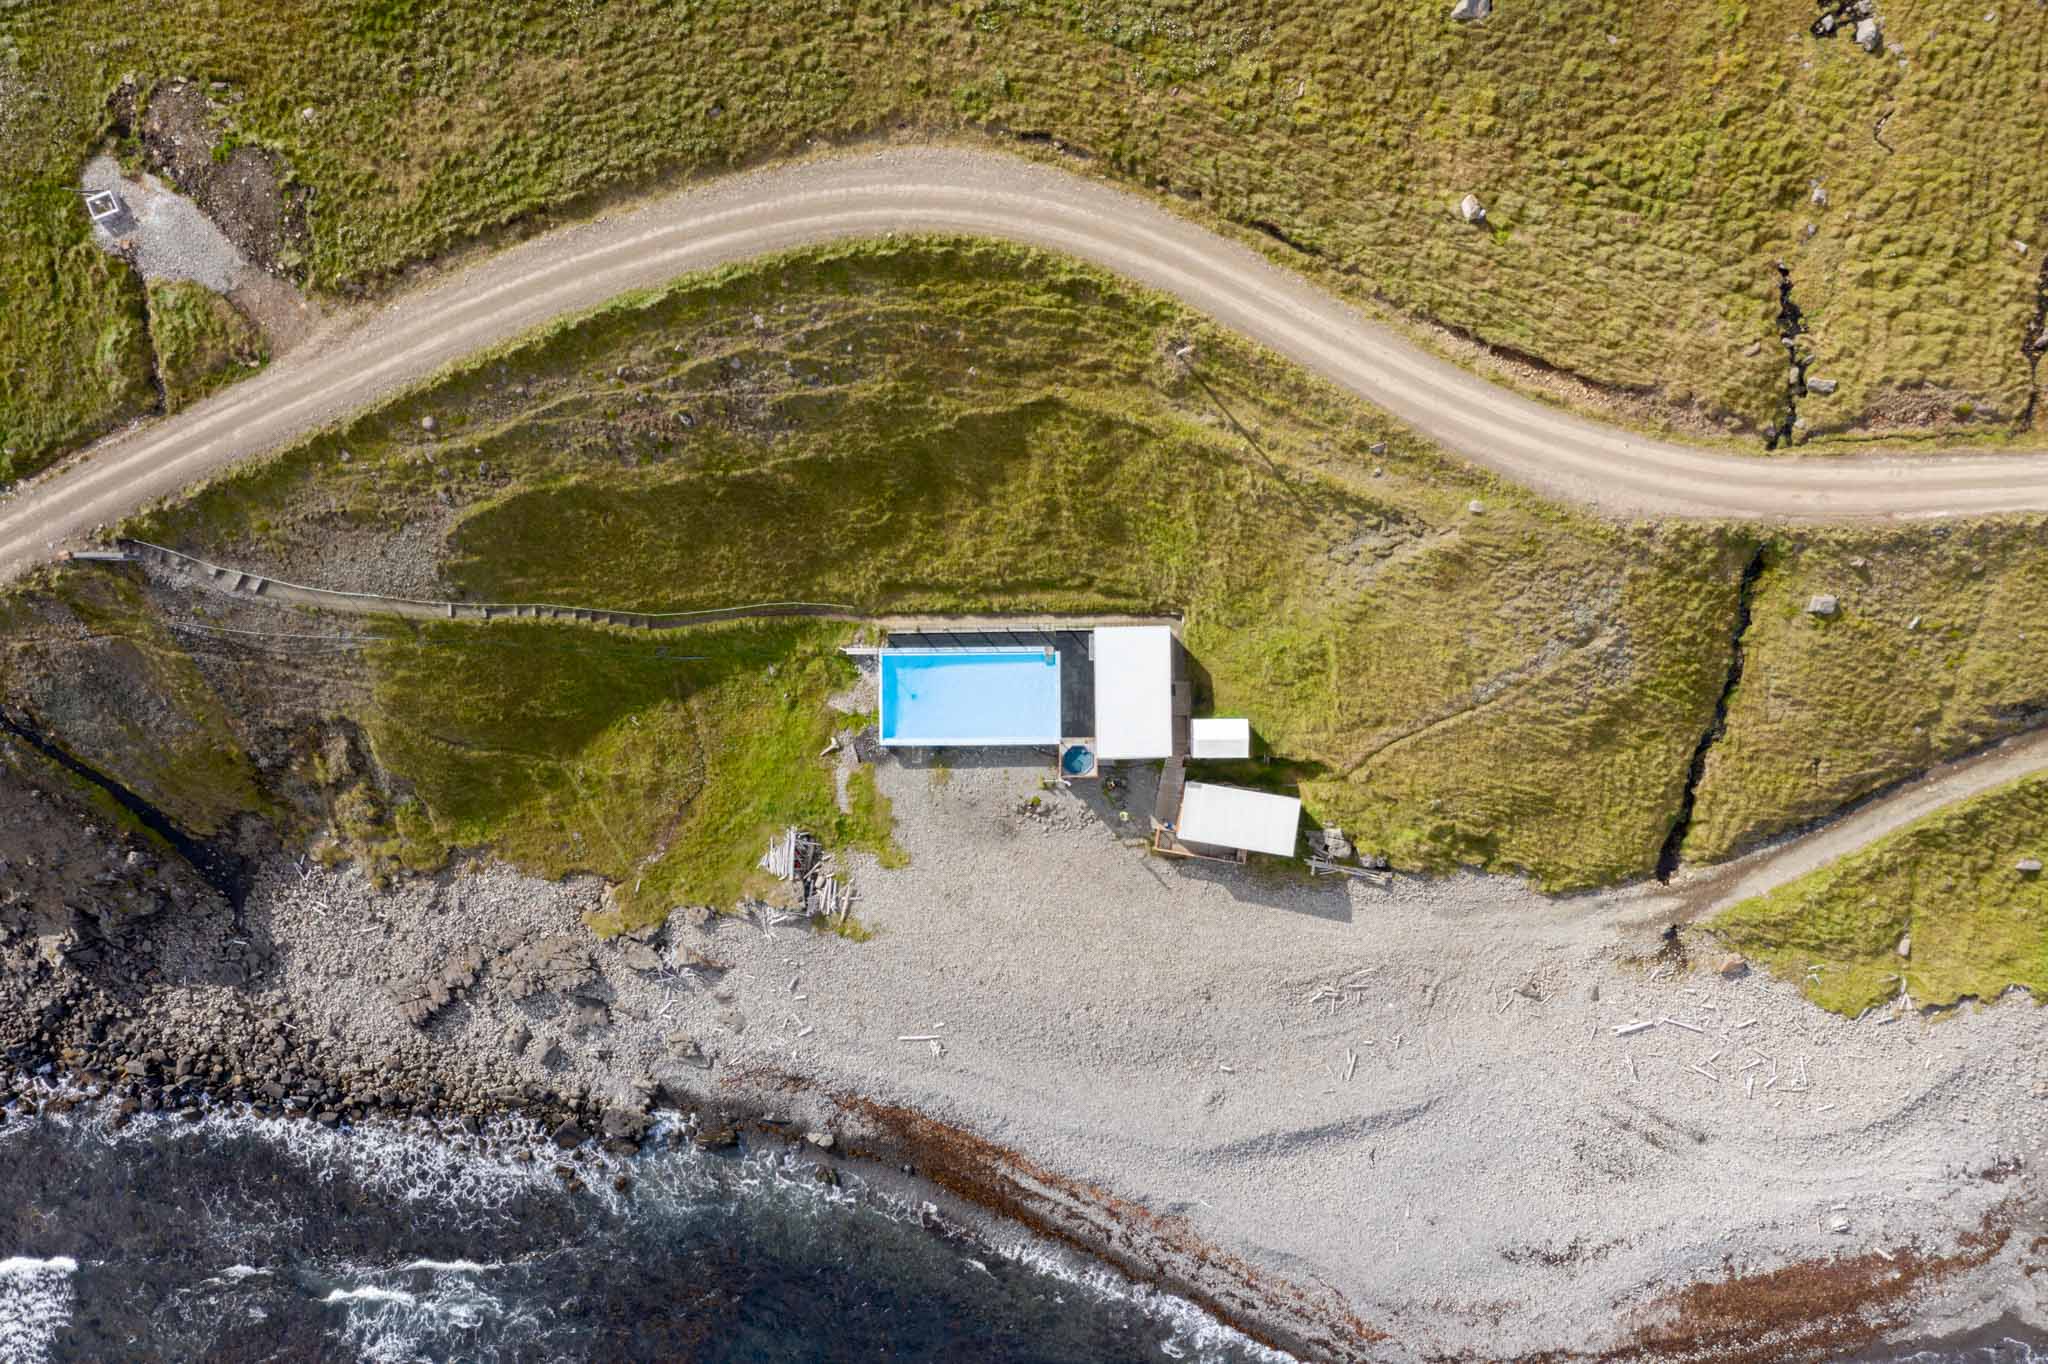 a swimming pool on a rocky beach